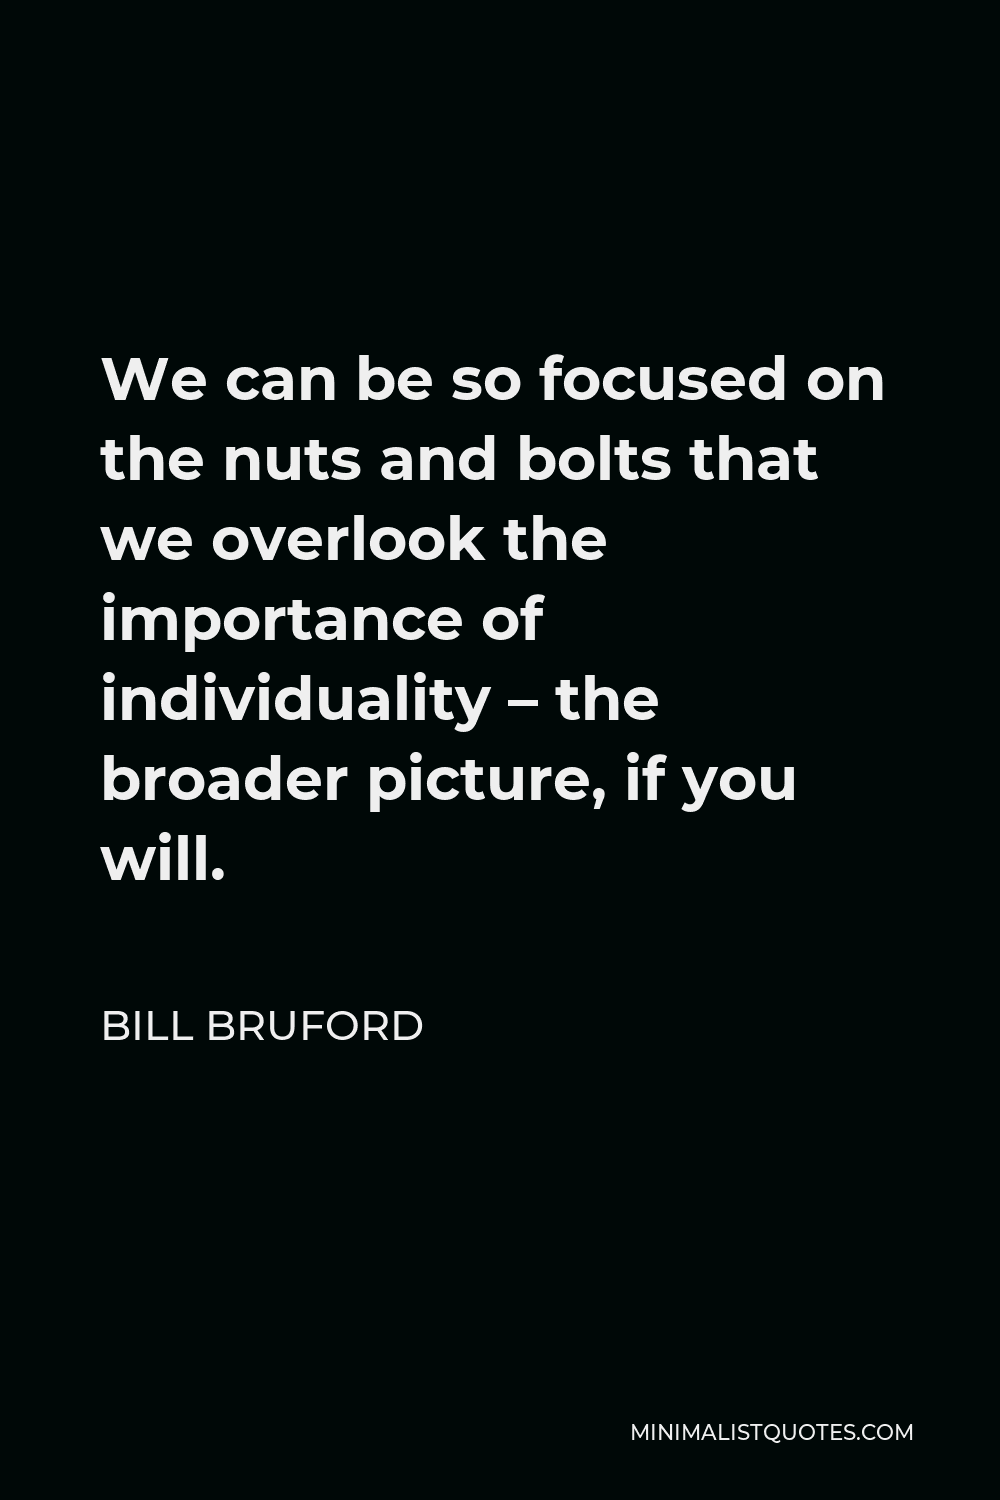 Bill Bruford Quote - We can be so focused on the nuts and bolts that we overlook the importance of individuality – the broader picture, if you will.